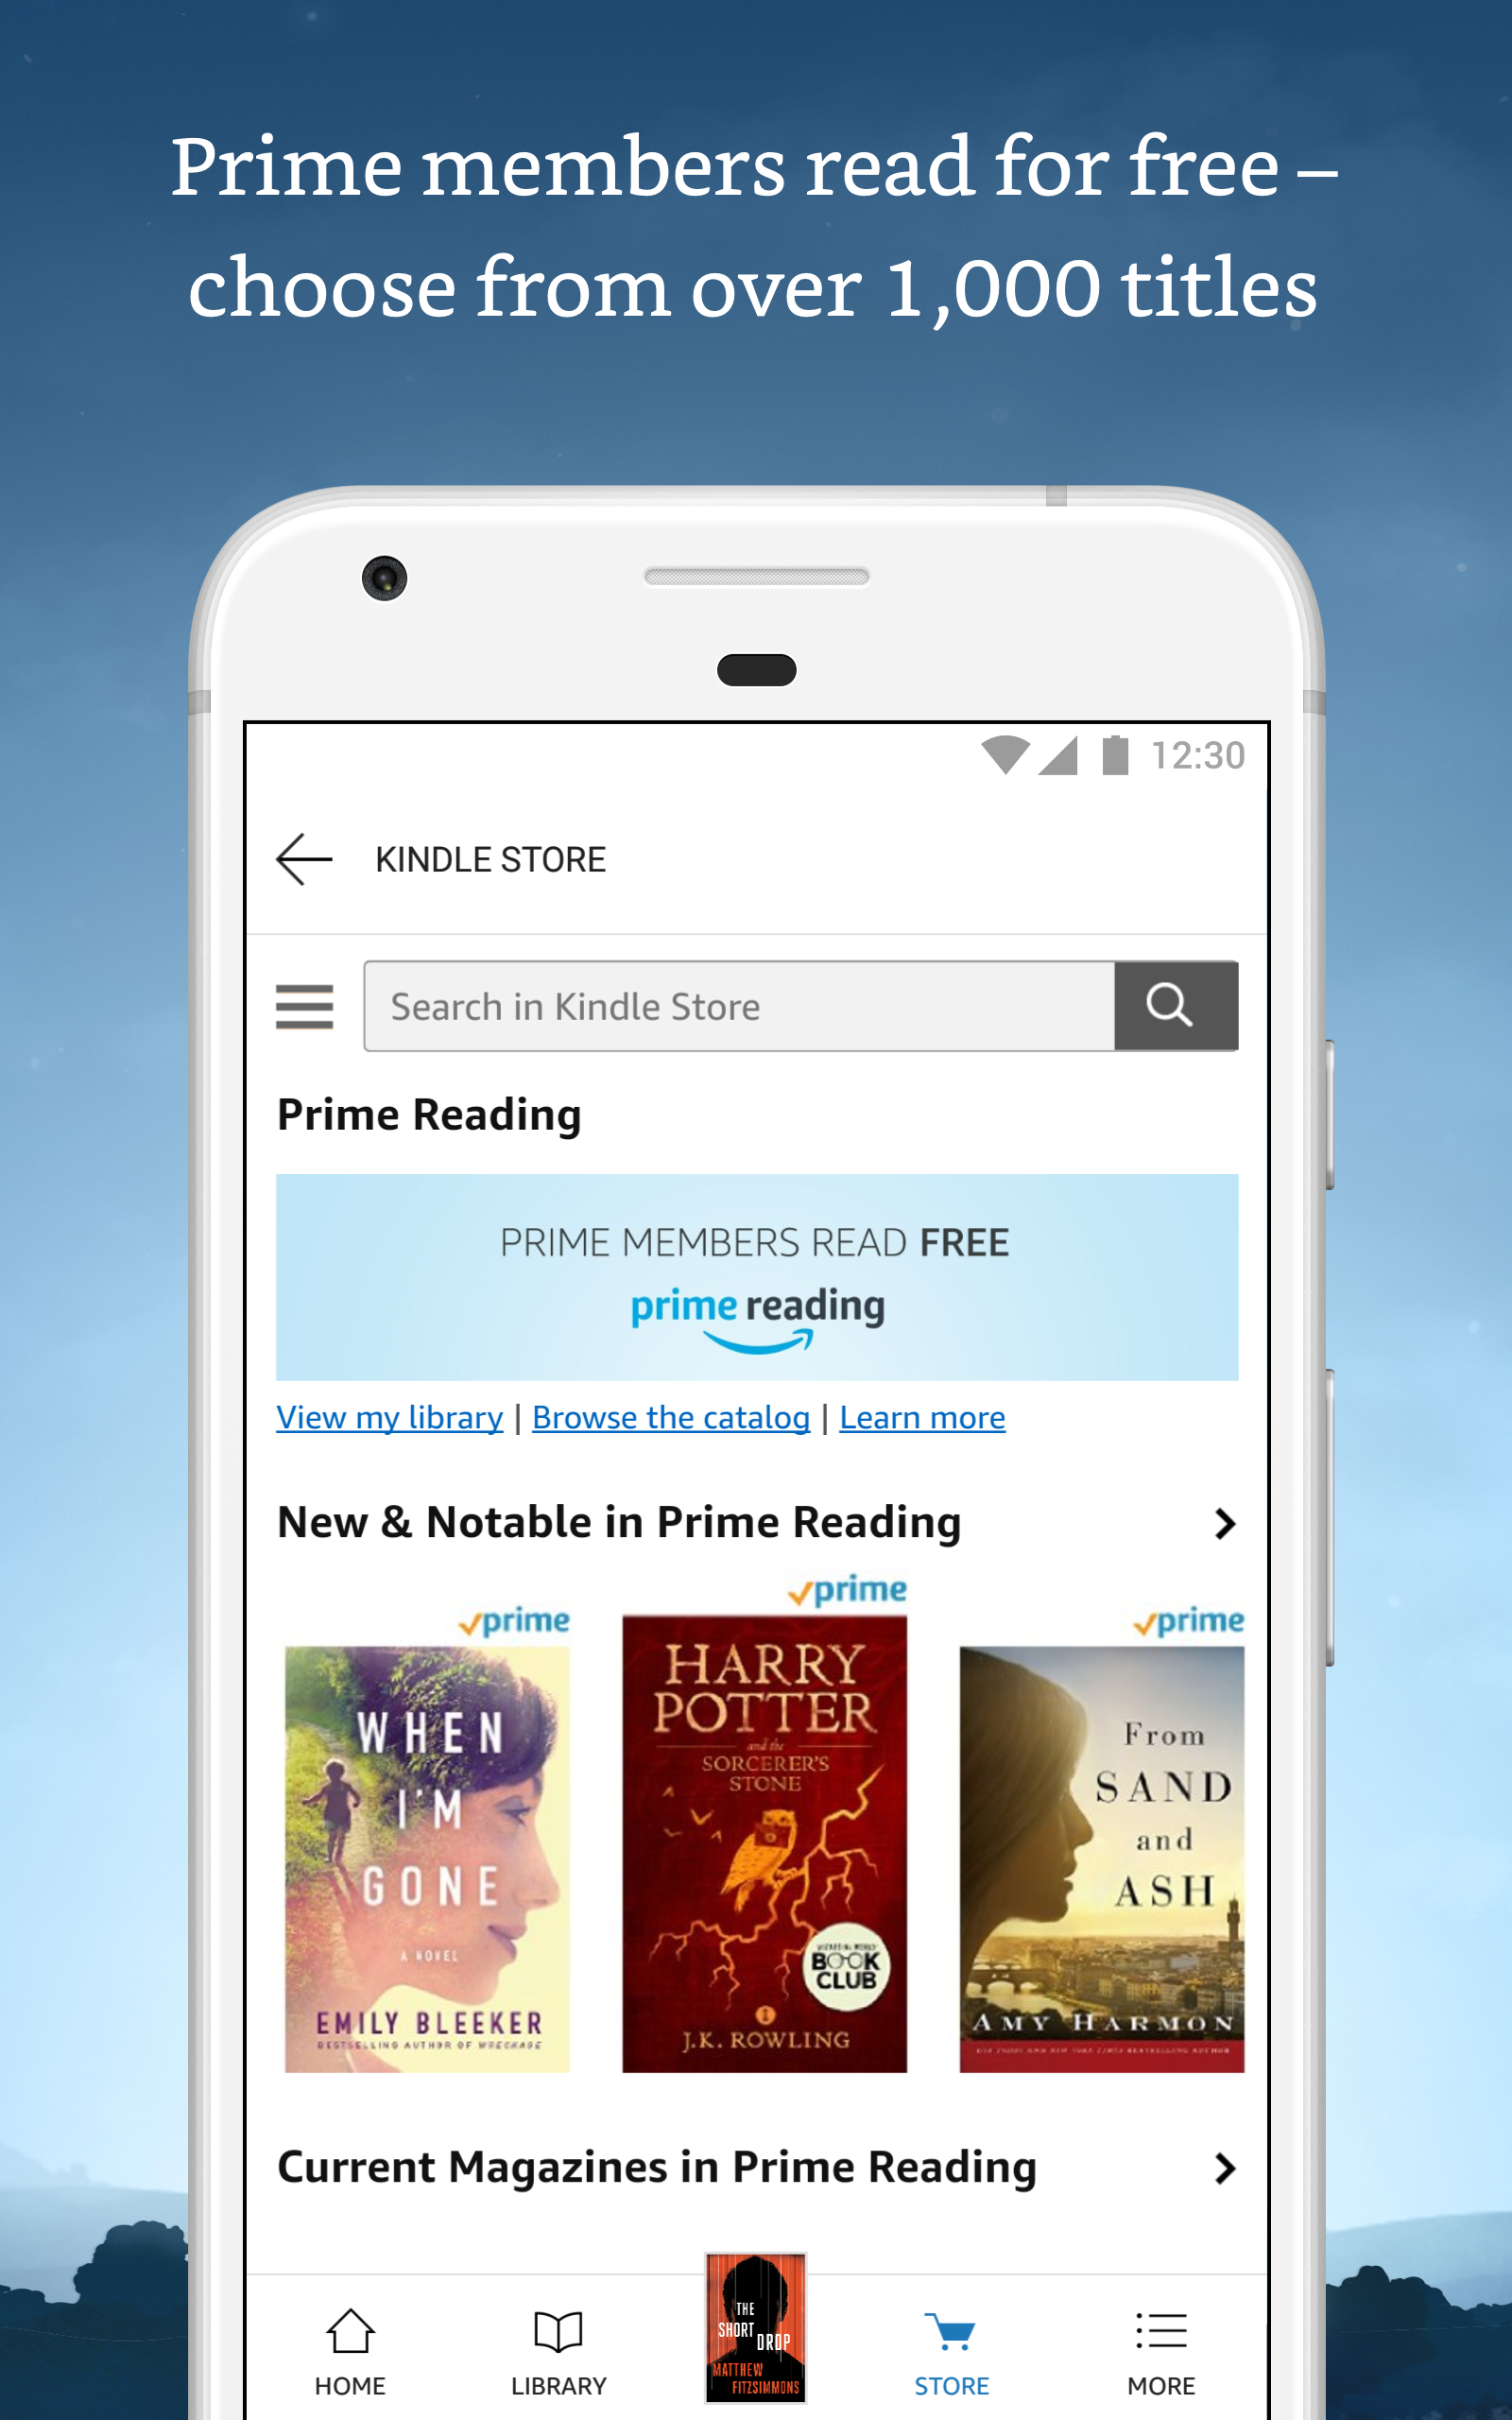 Kindle for Android